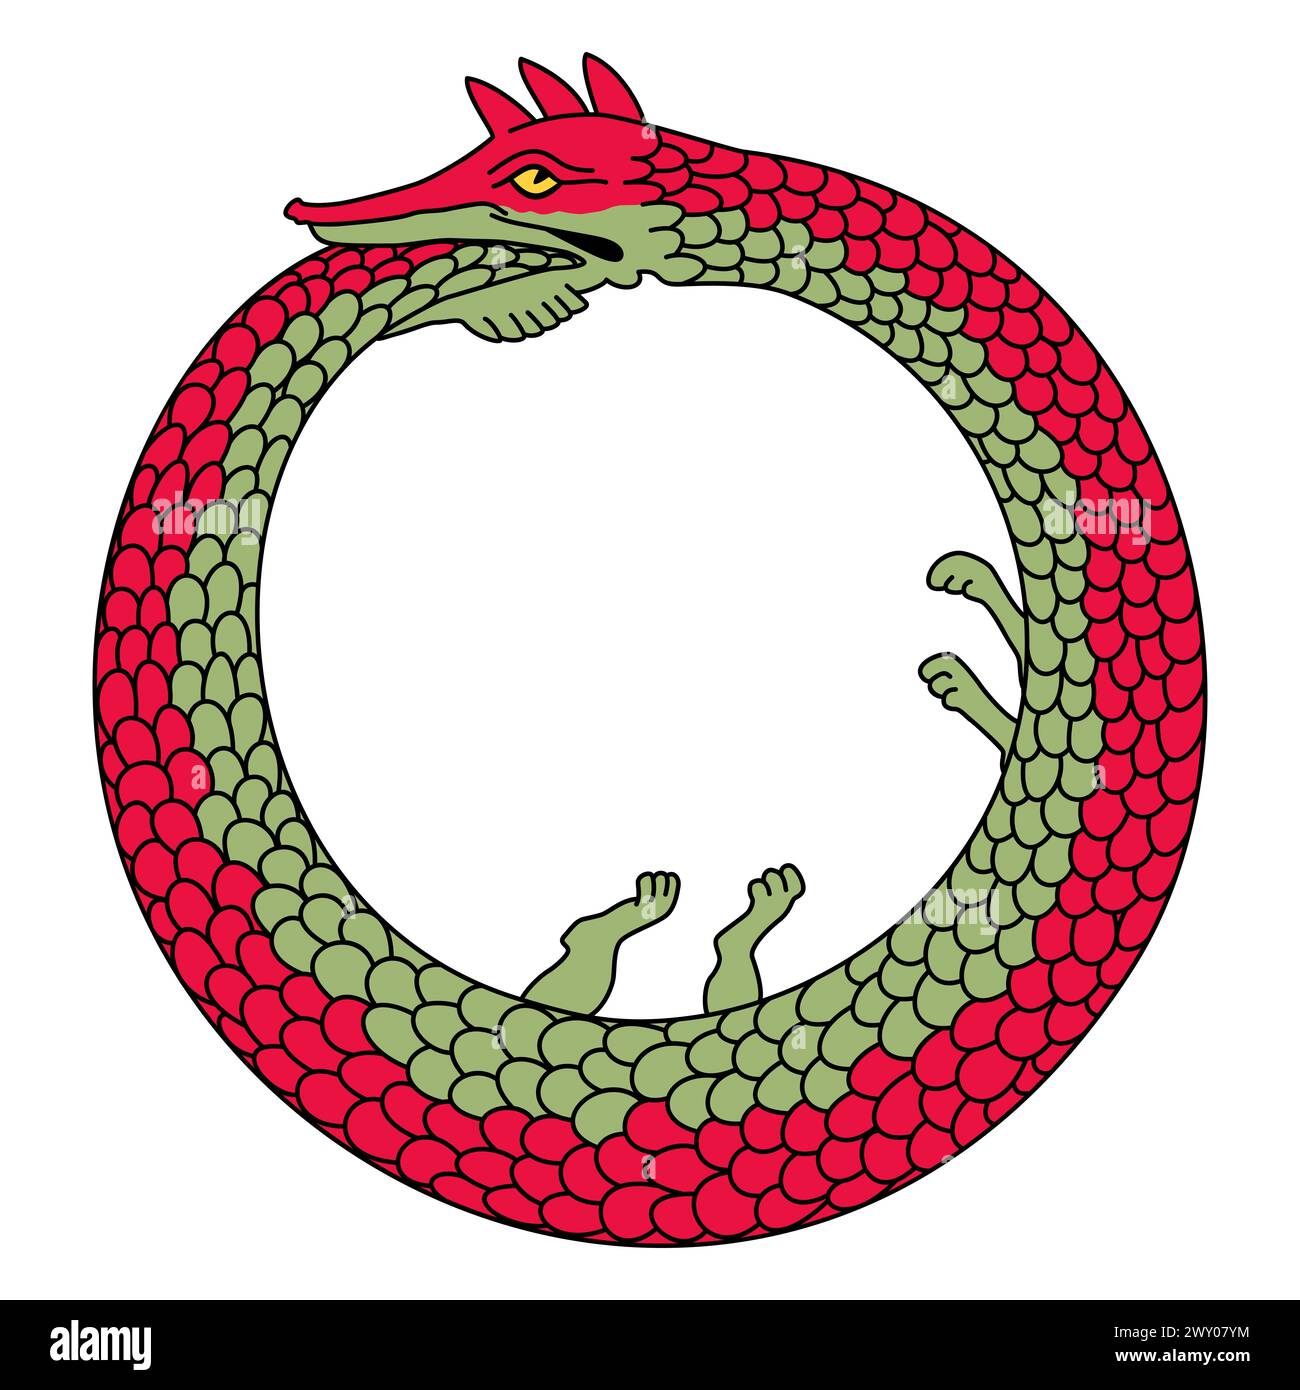 Ouroboros or uroboros, an ancient symbol for eternal cyclic renewal or a cycle of life, death and rebirth. A serpent or dragon eating its own tail. Stock Photo